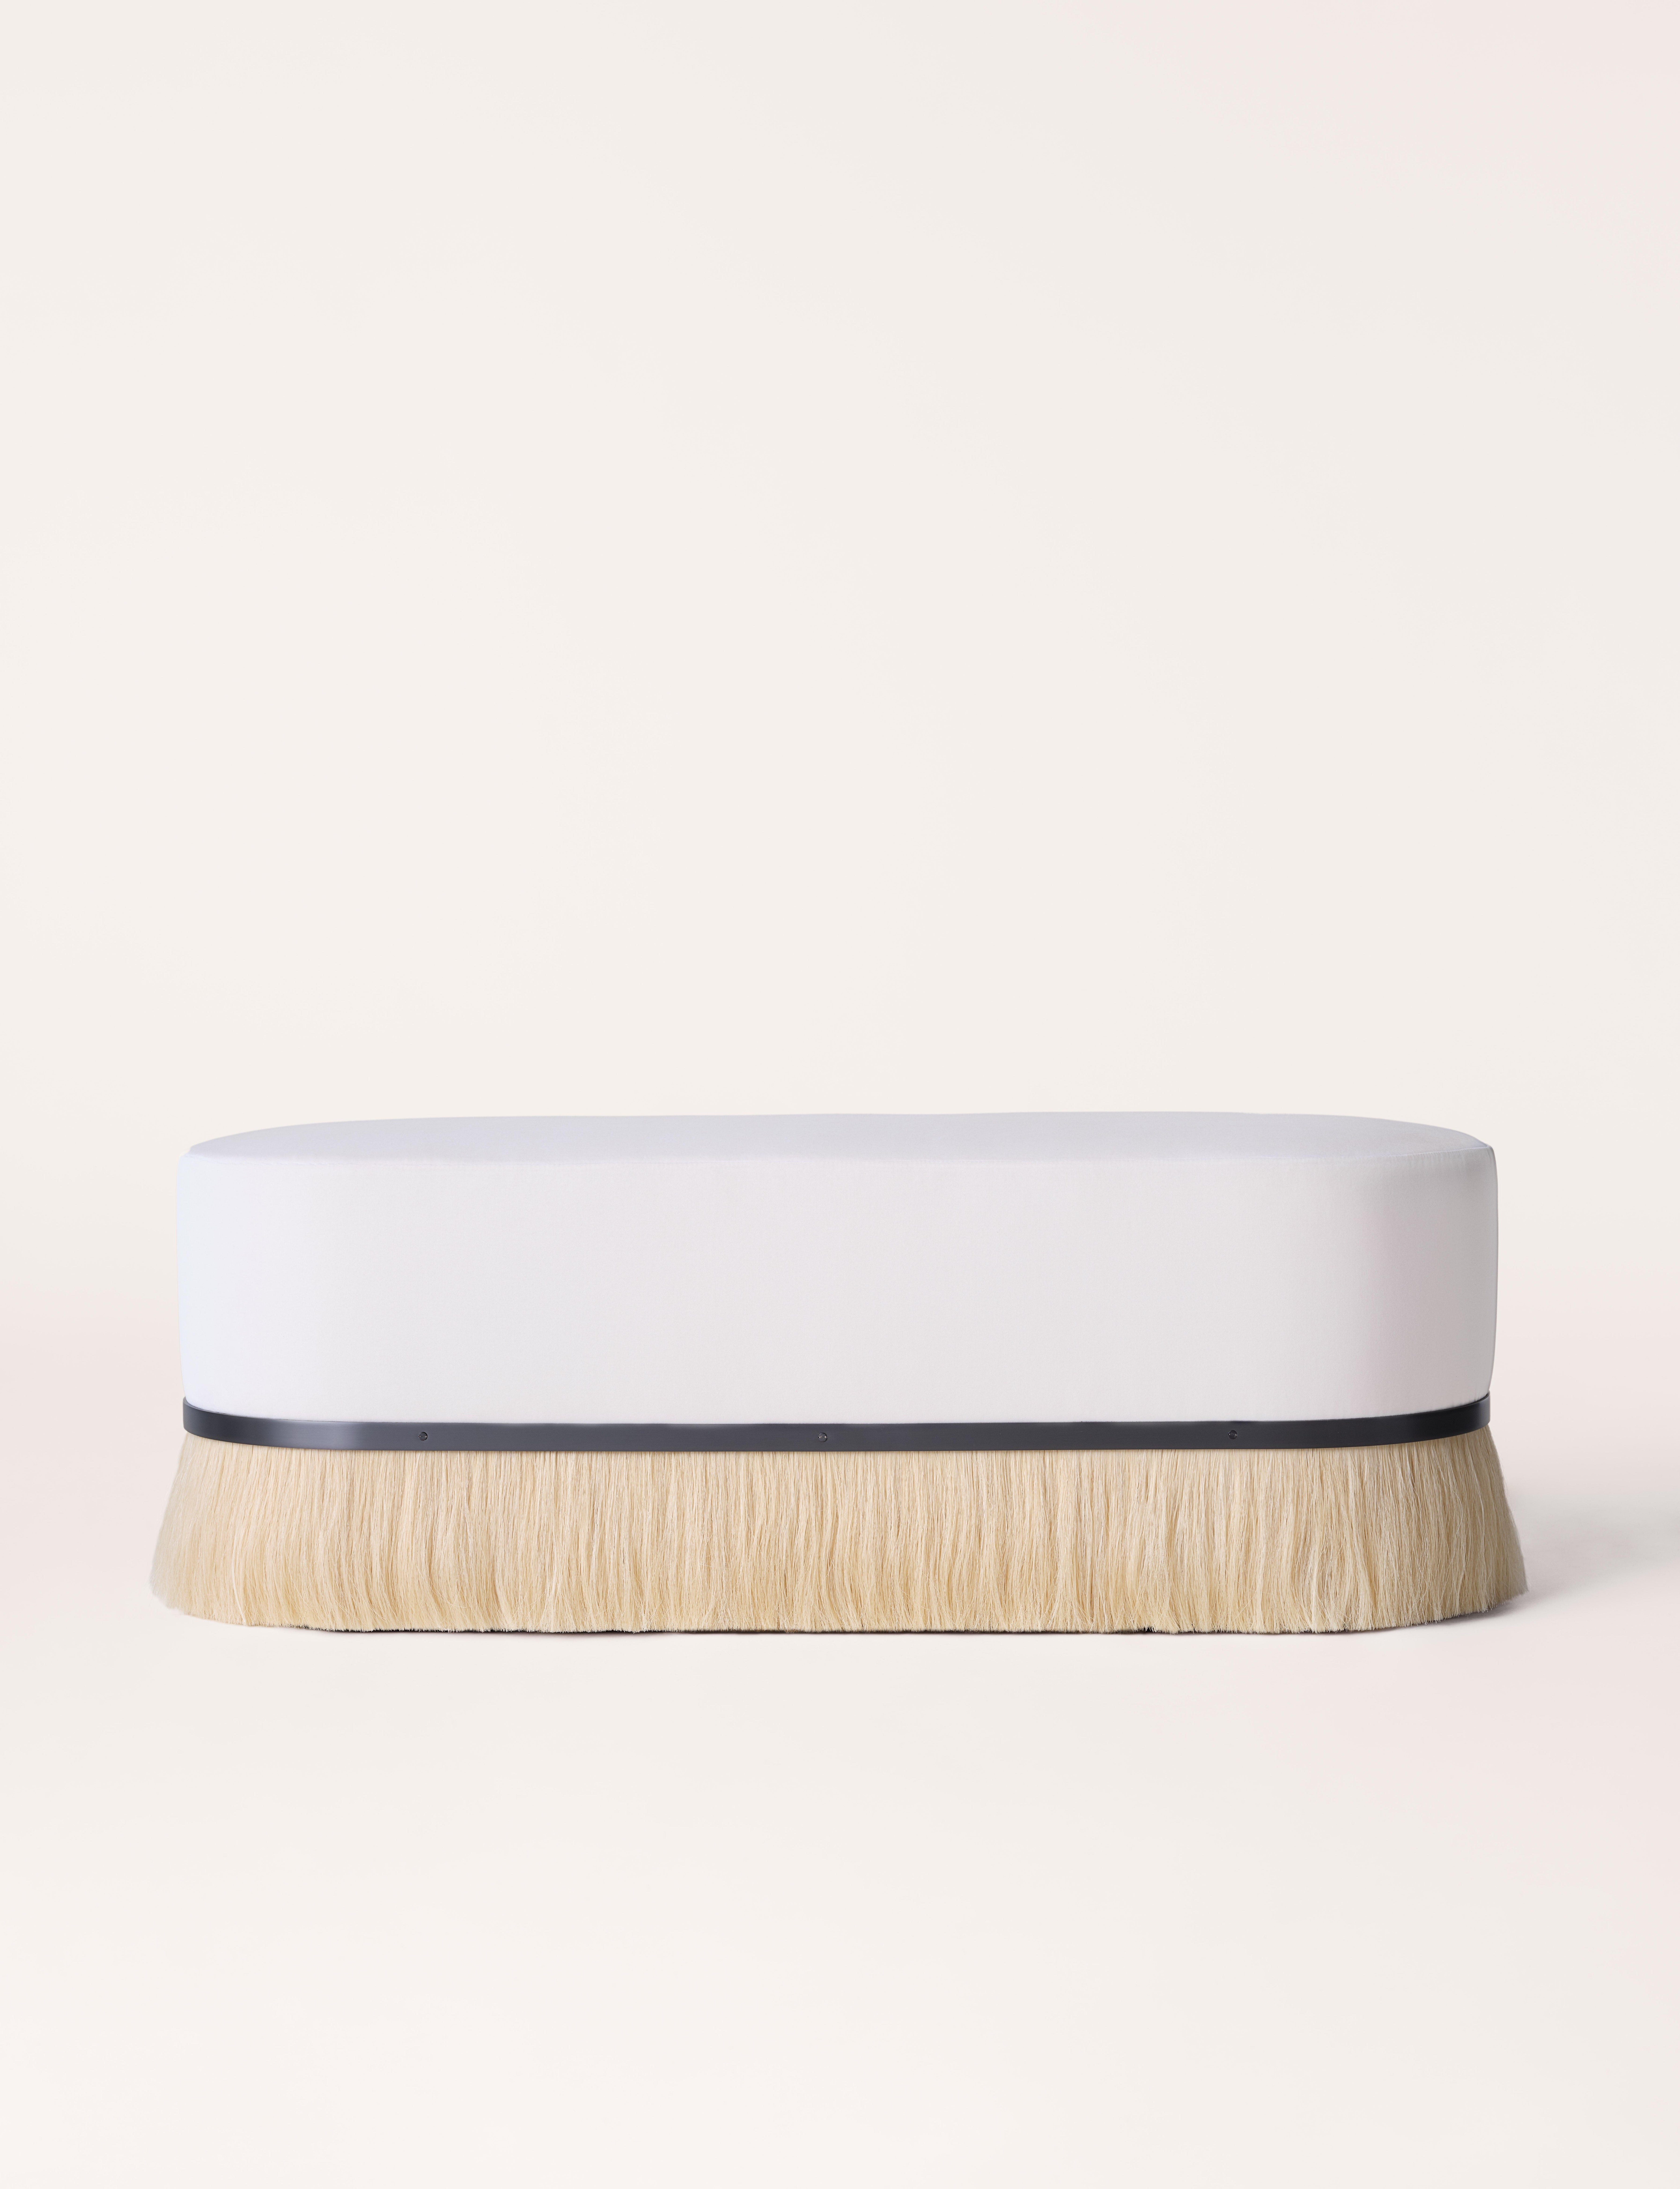 A larger version of our Thing stools, the Thing ottoman features a luxuriously upholstered top, accented with the warmth of brass and the coarseness of horse hair. 

The Pill Thing Ottoman is made to order with graded-in velvet or COM/COL. Please